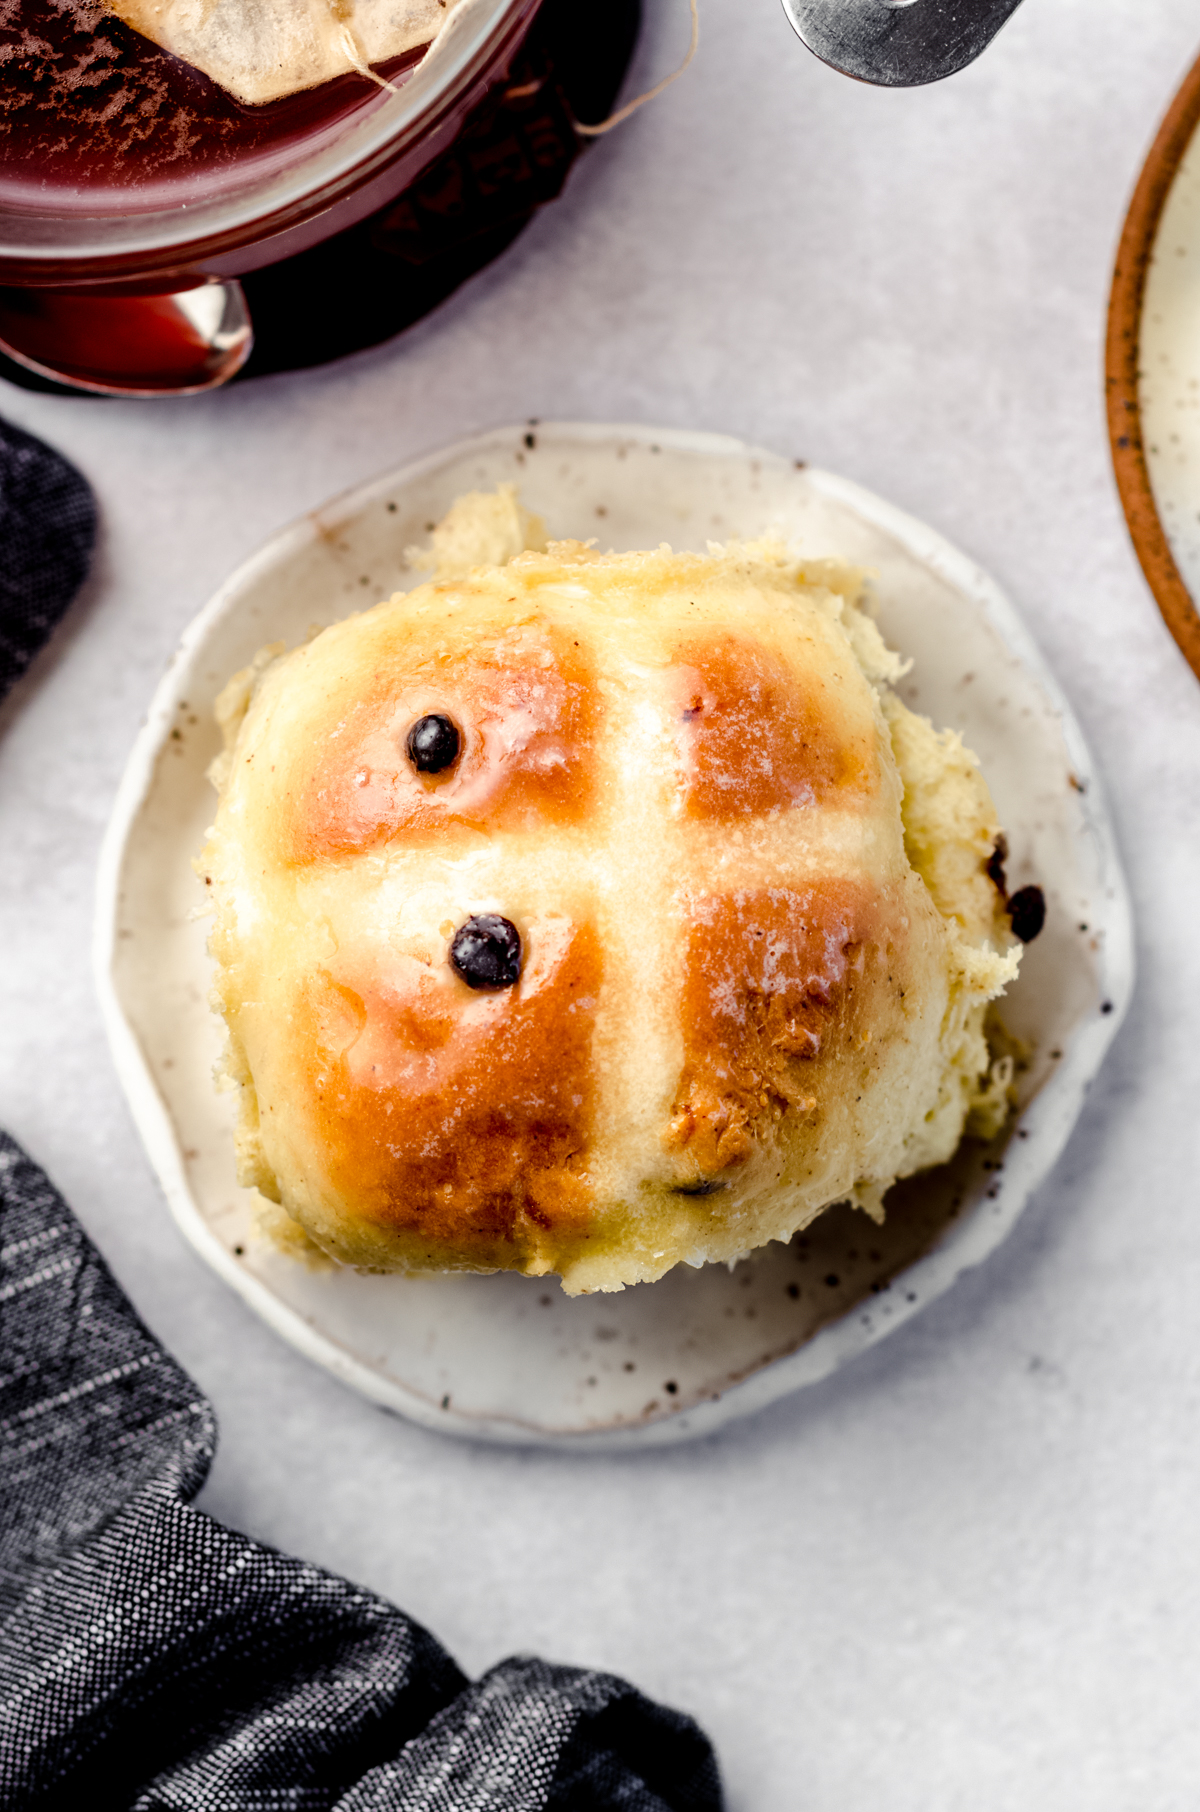 Aerial photo of a hot cross bun on a plate.